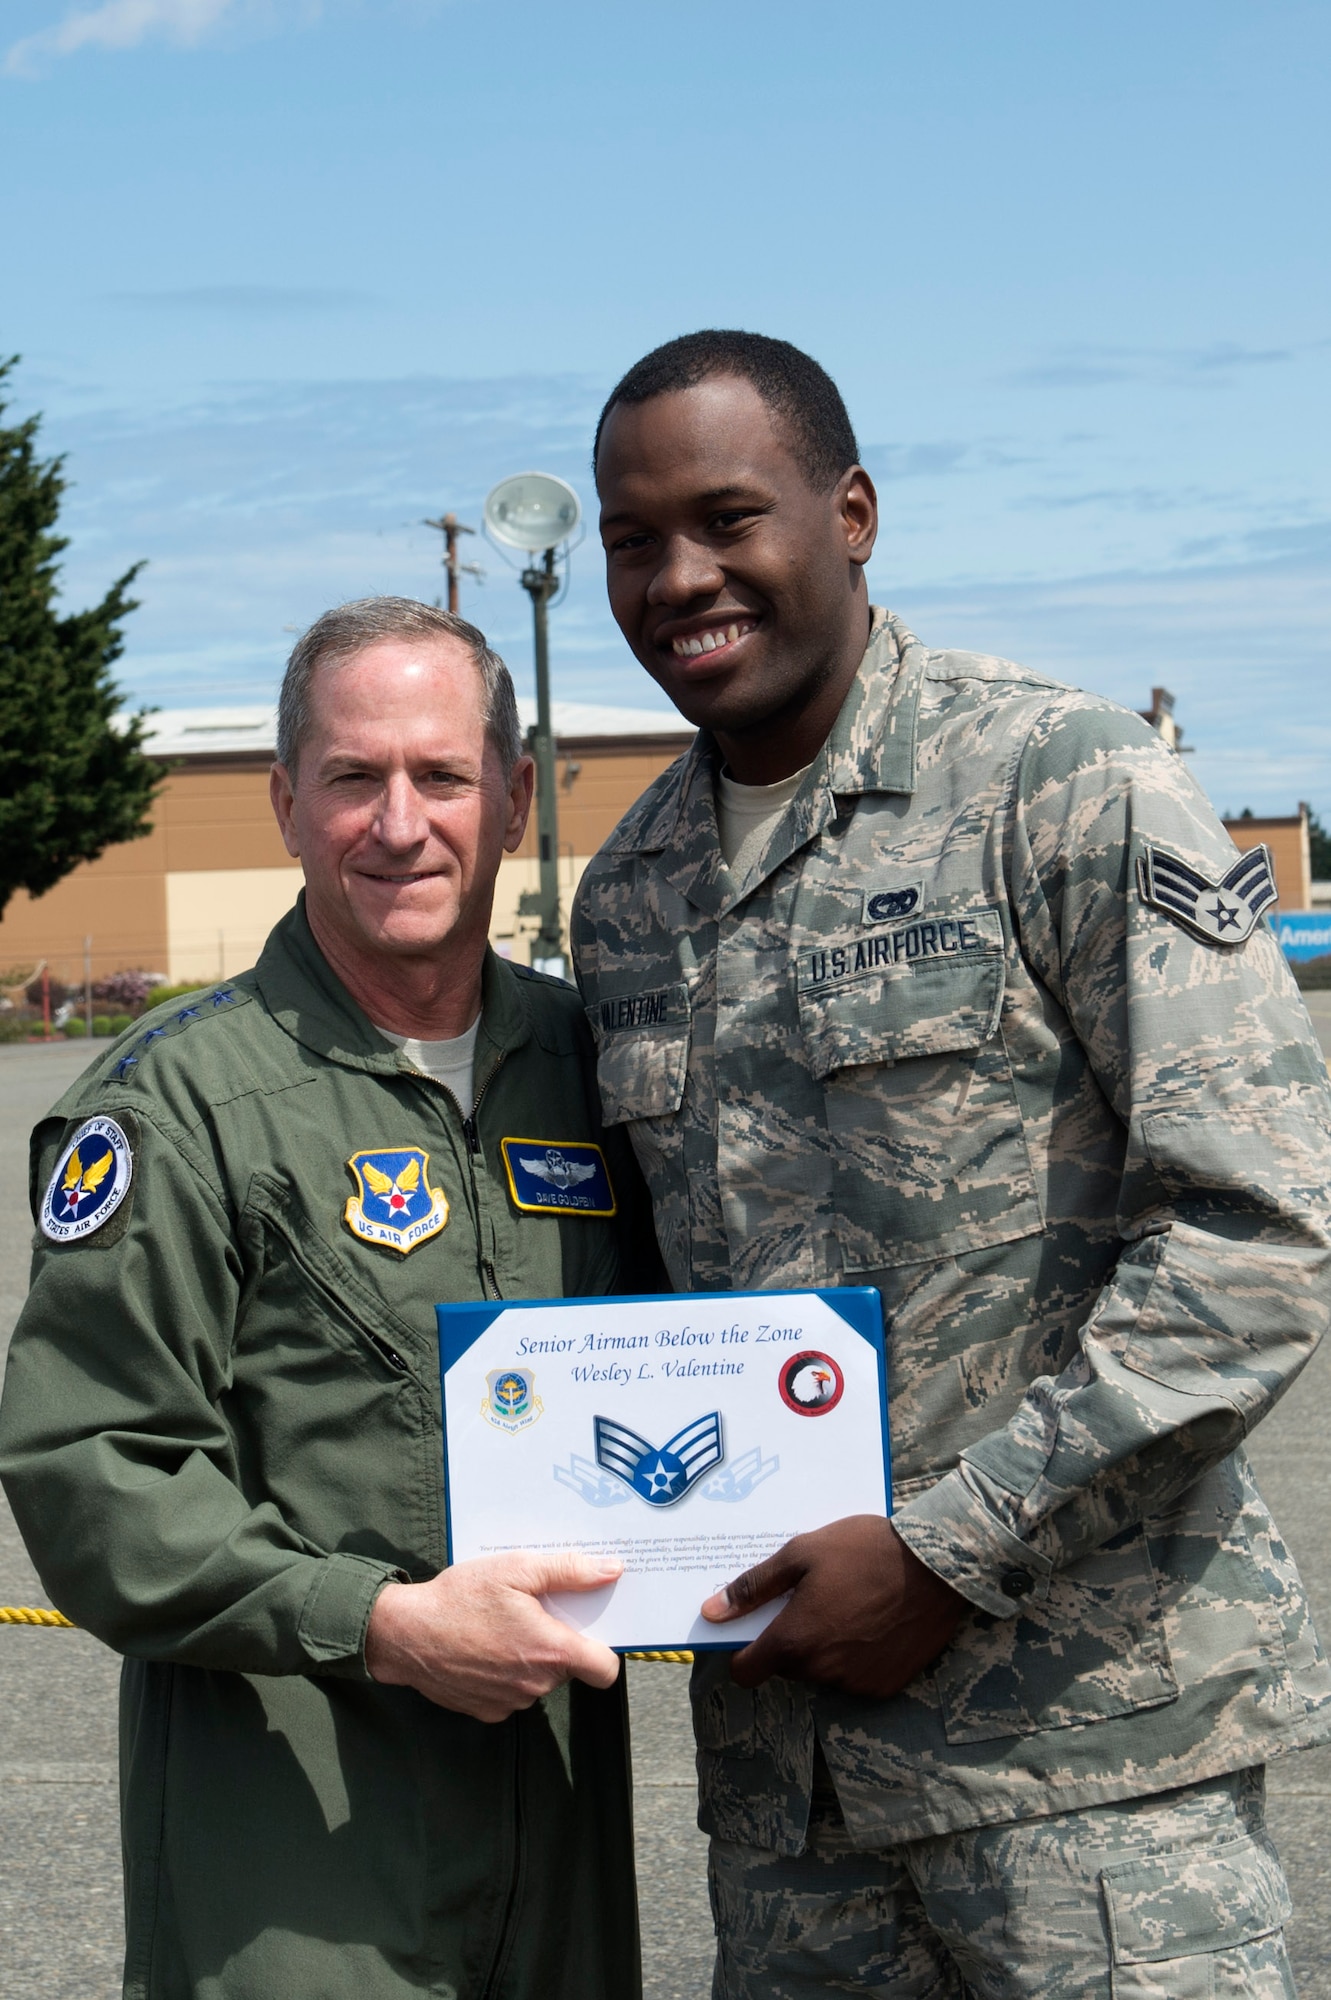 Gen David Goldfein, Chief of Staff of the Air Force, presents Airman 1st Class Wesley Valentine, 62nd Aerial Port Squadron, with a Senior Airman Below the Zone (BTZ) promotion, June 5, 2018, at Joint Base Lewis-McChord, Wash. An Airman selected for a BTZ promotion is promoted to Senior Airman six months earlier than their scheduled time-in-grade promotion. (U.S. Air Force photo by A1C Sara Hoerichs)